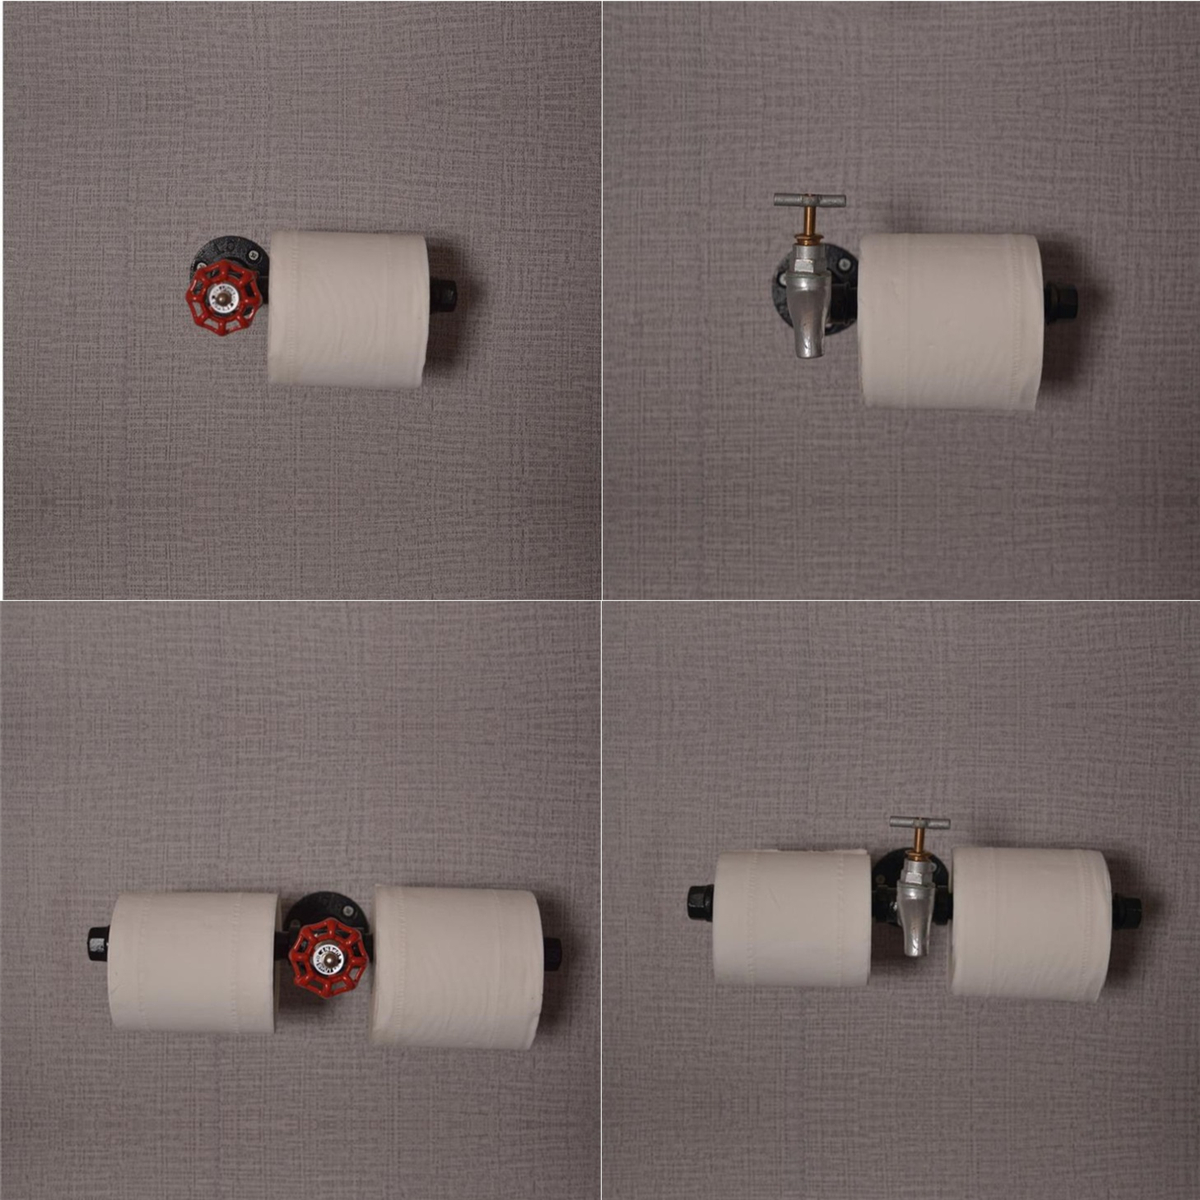 Retro-Industrial-Toilet-Paper-Roll-Holder-Pipe-Shelf-Floating-Holder-Bathroom-Wall-Mounted-1390098-1